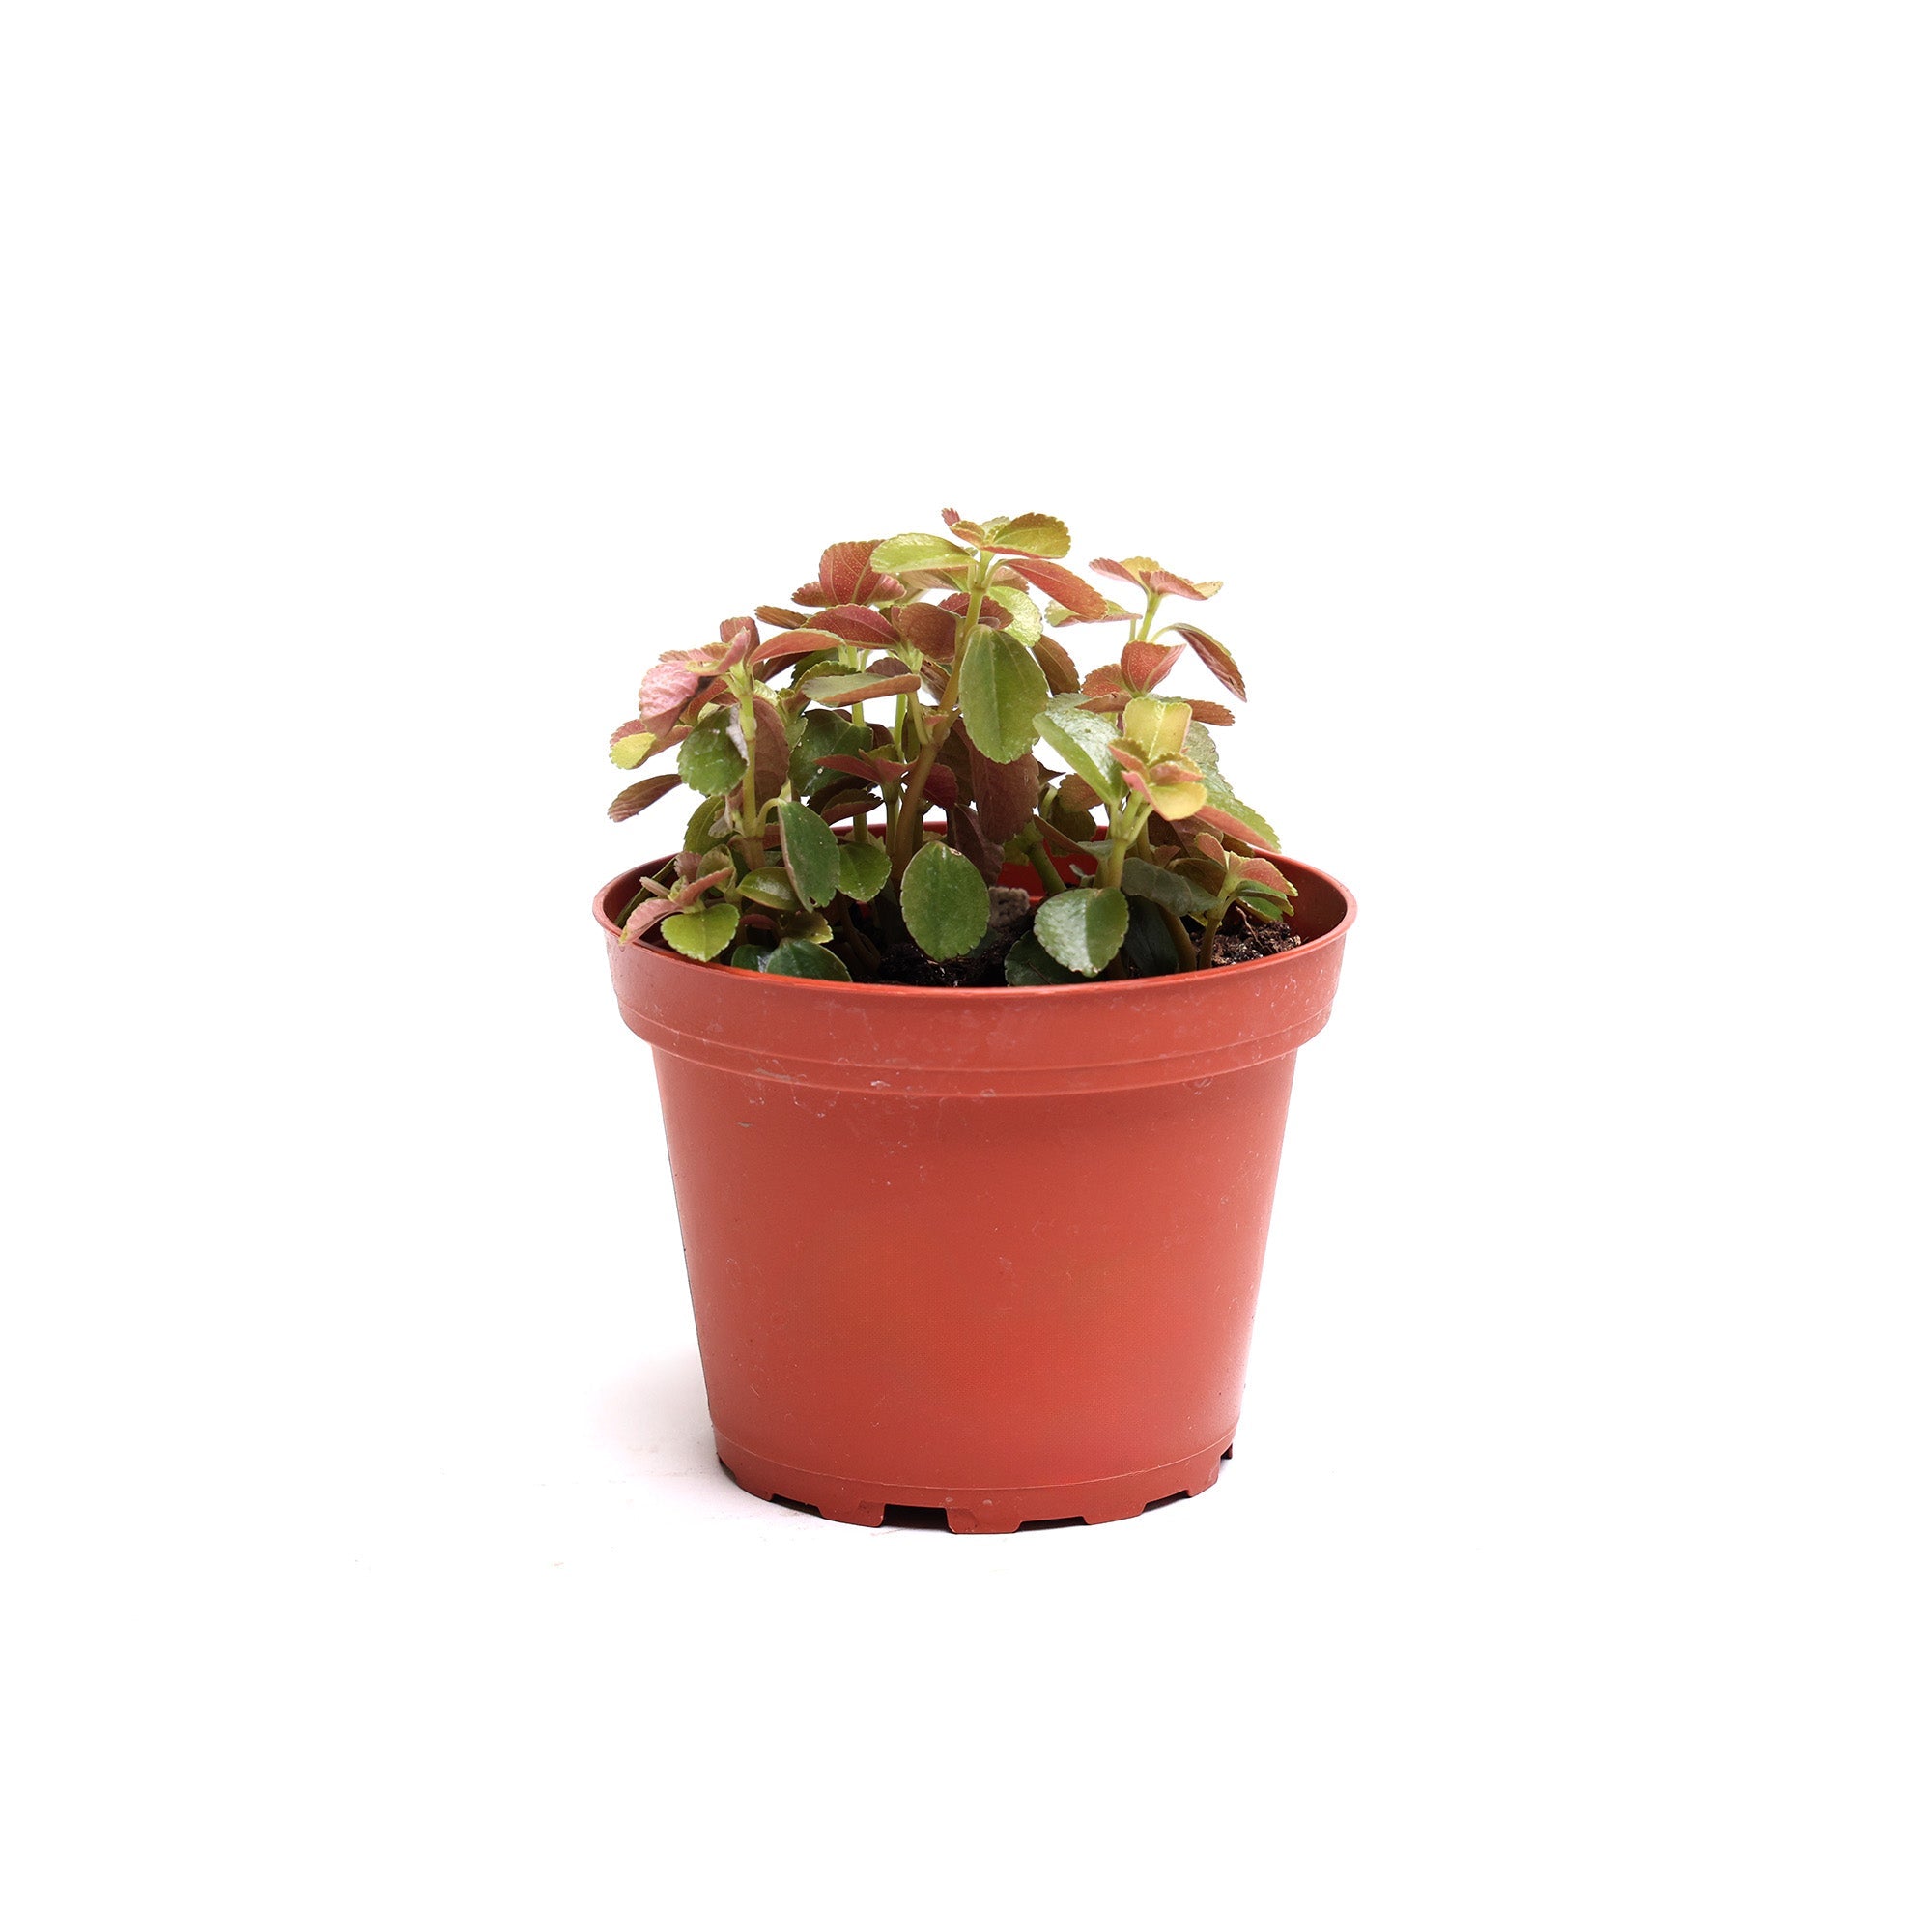 A small Pilea Depressa 4 Inches plant with lush green and red leaves in a terracotta pot, isolated on a white background from Chive Studio.